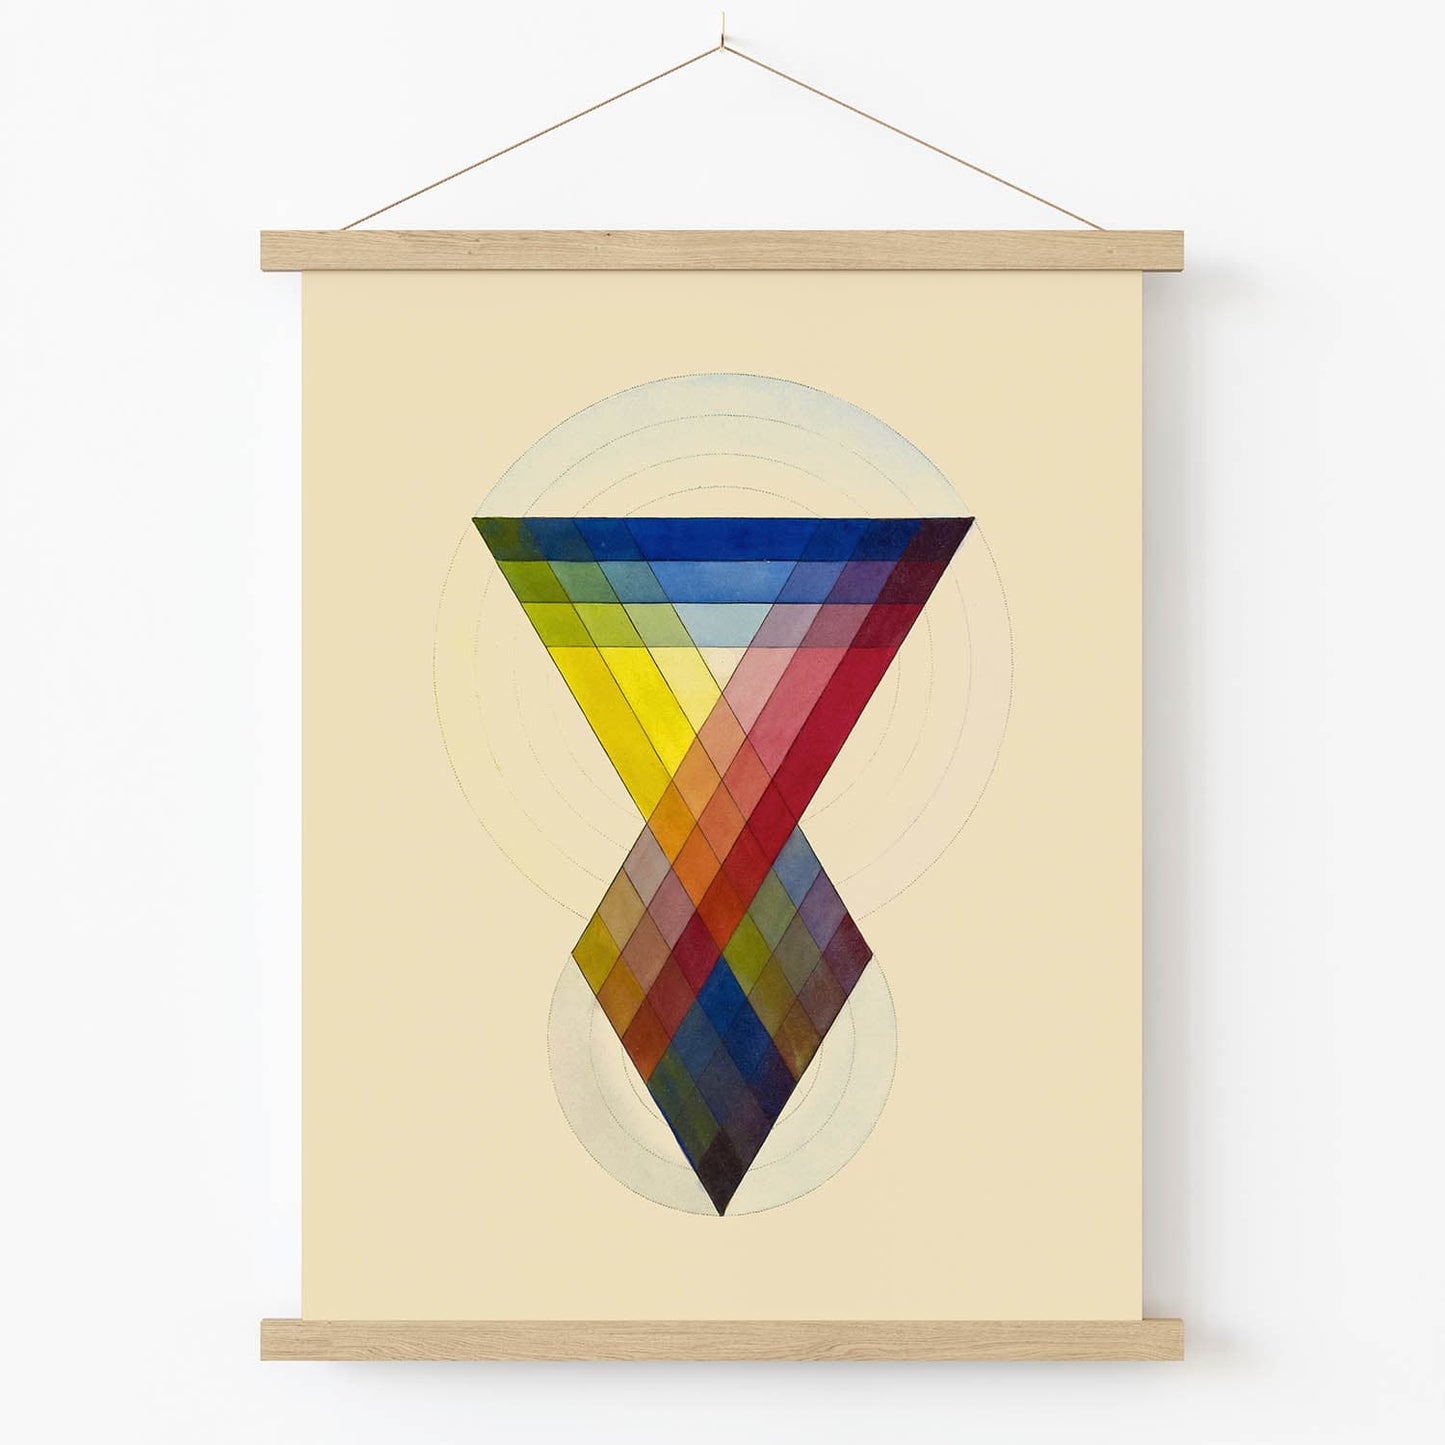 Study of Colors Art Print in Wood Hanger Frame on Wall